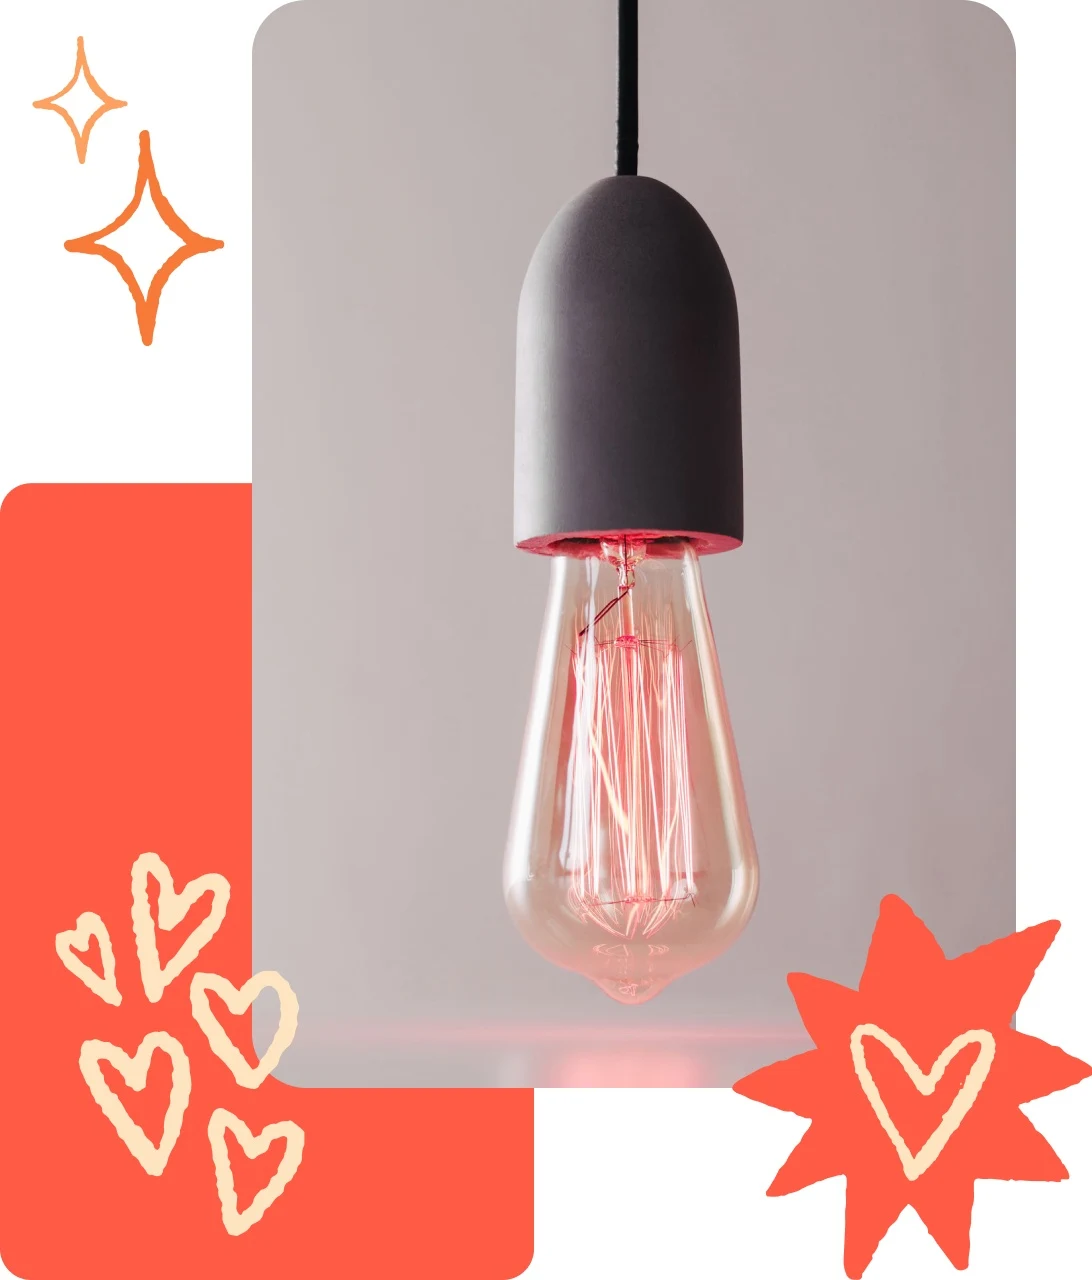 Pin collage of modern pendant with lightbulb, orange pin and heart illustrations